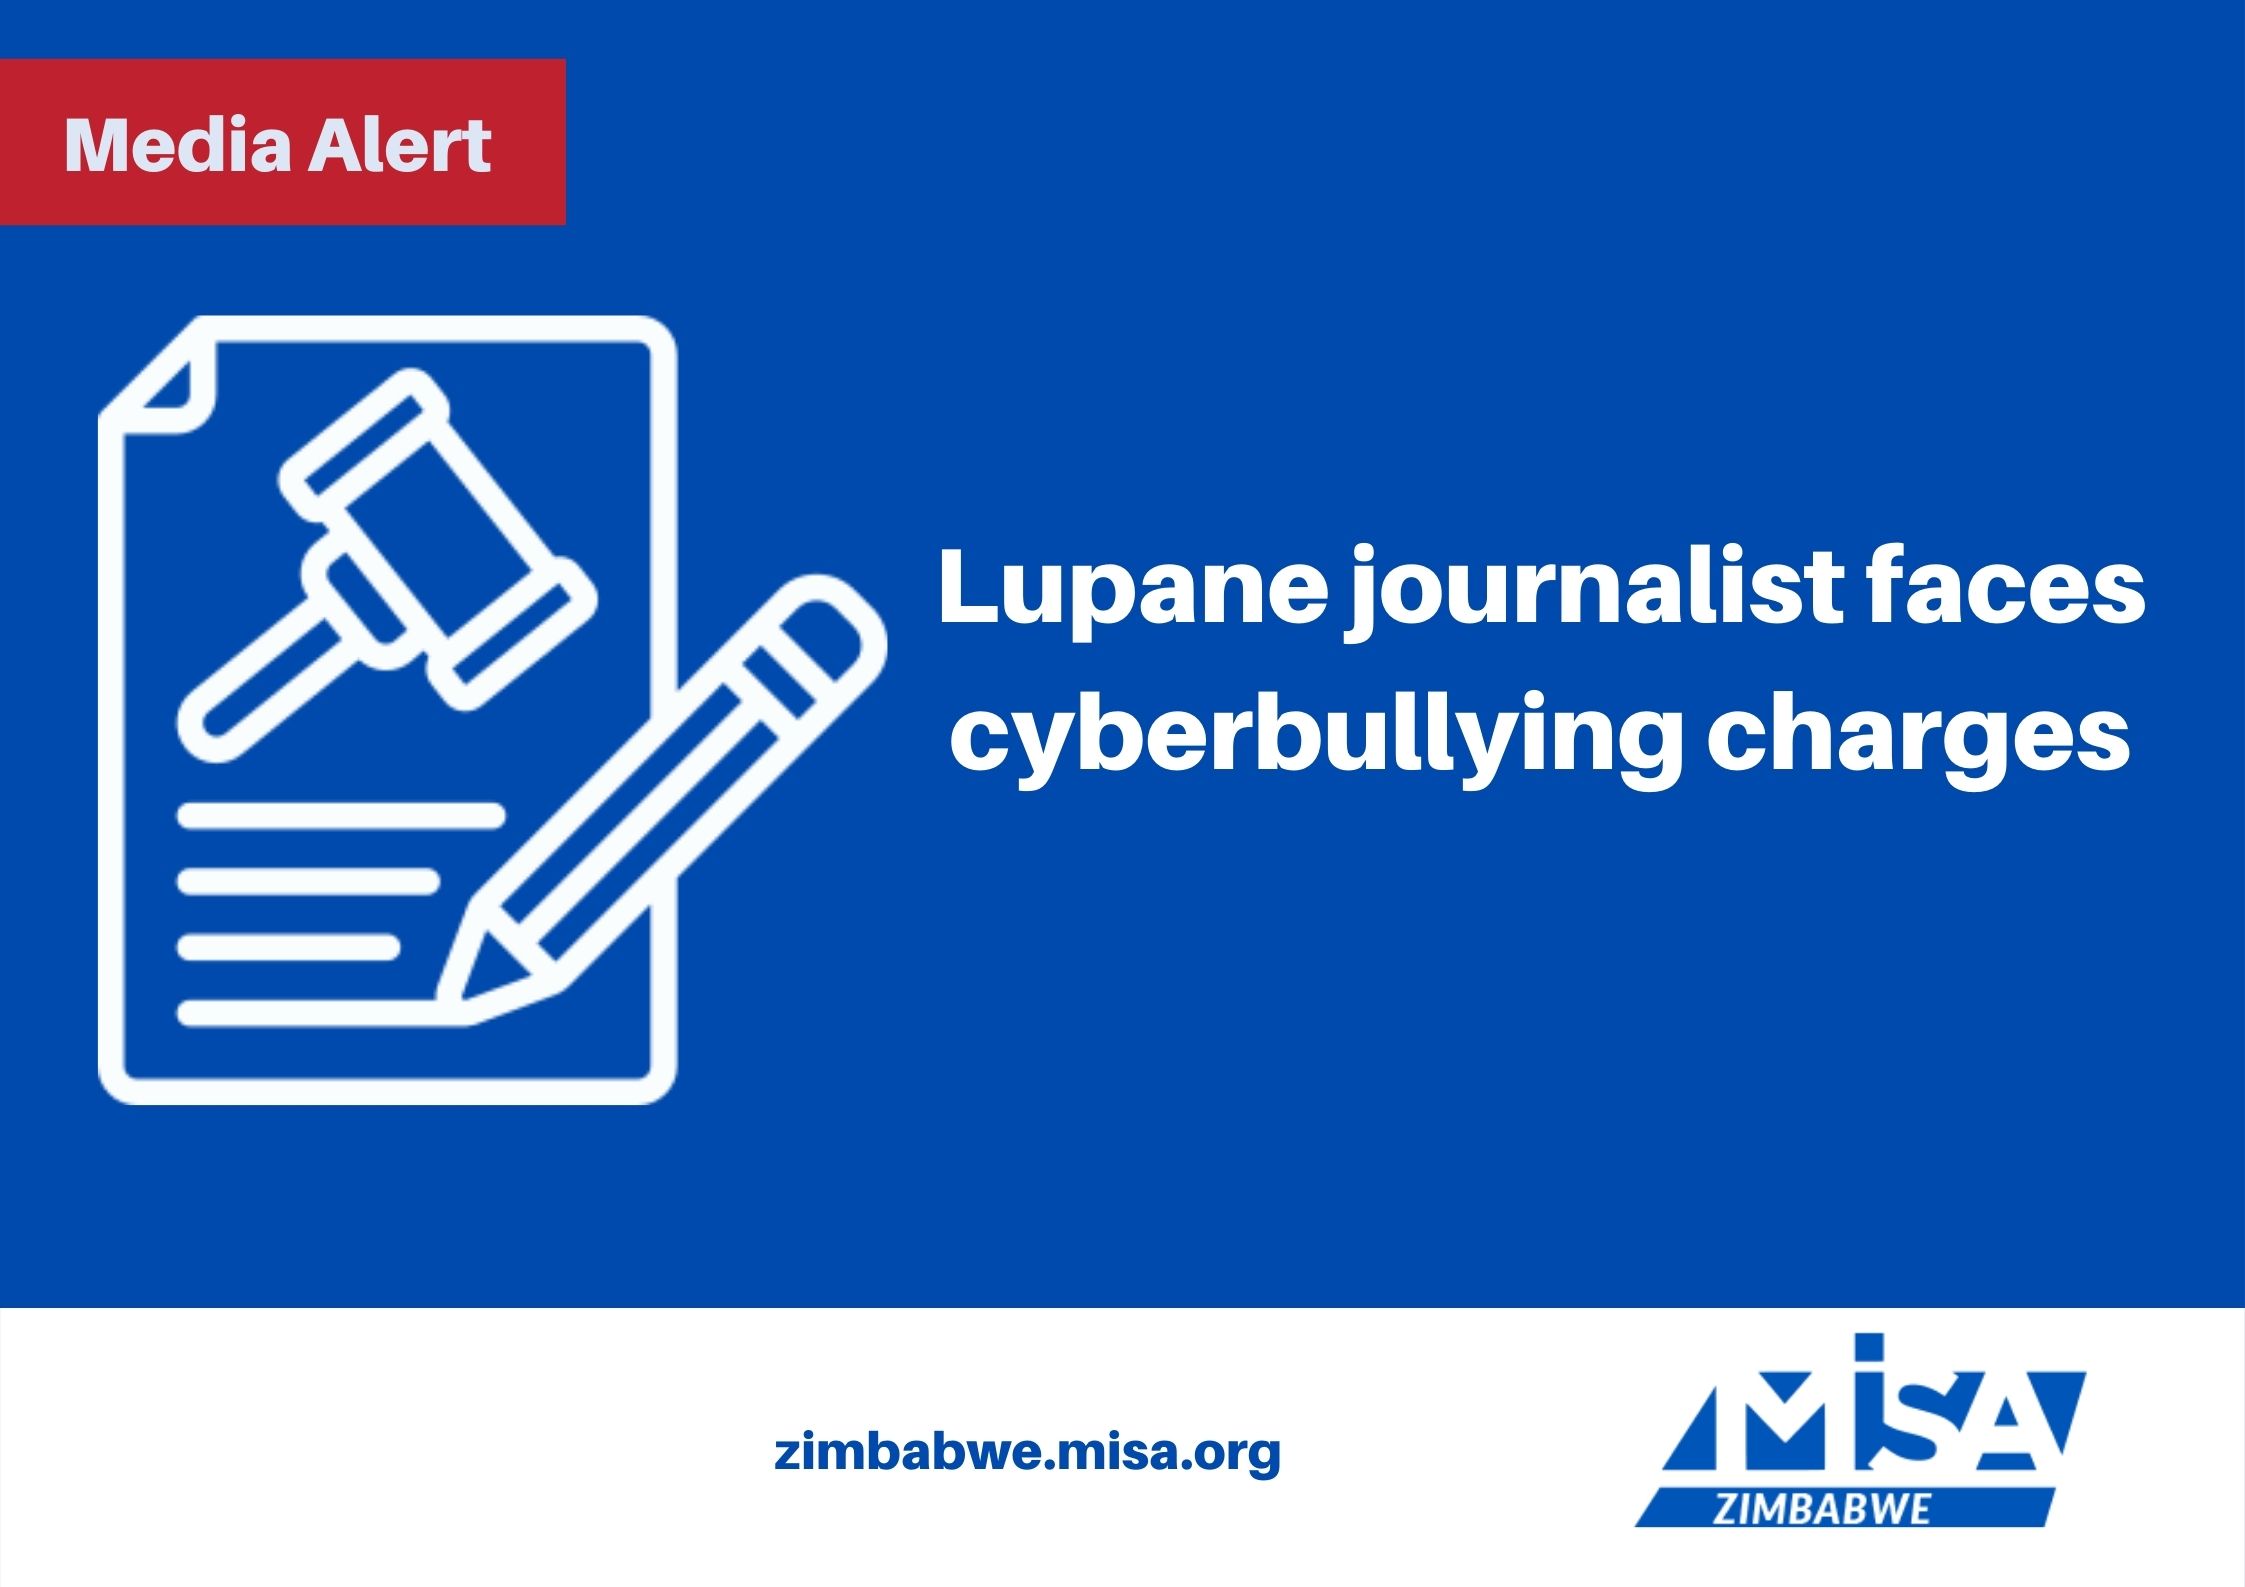 Lupane journalist faces cyberbullying charges